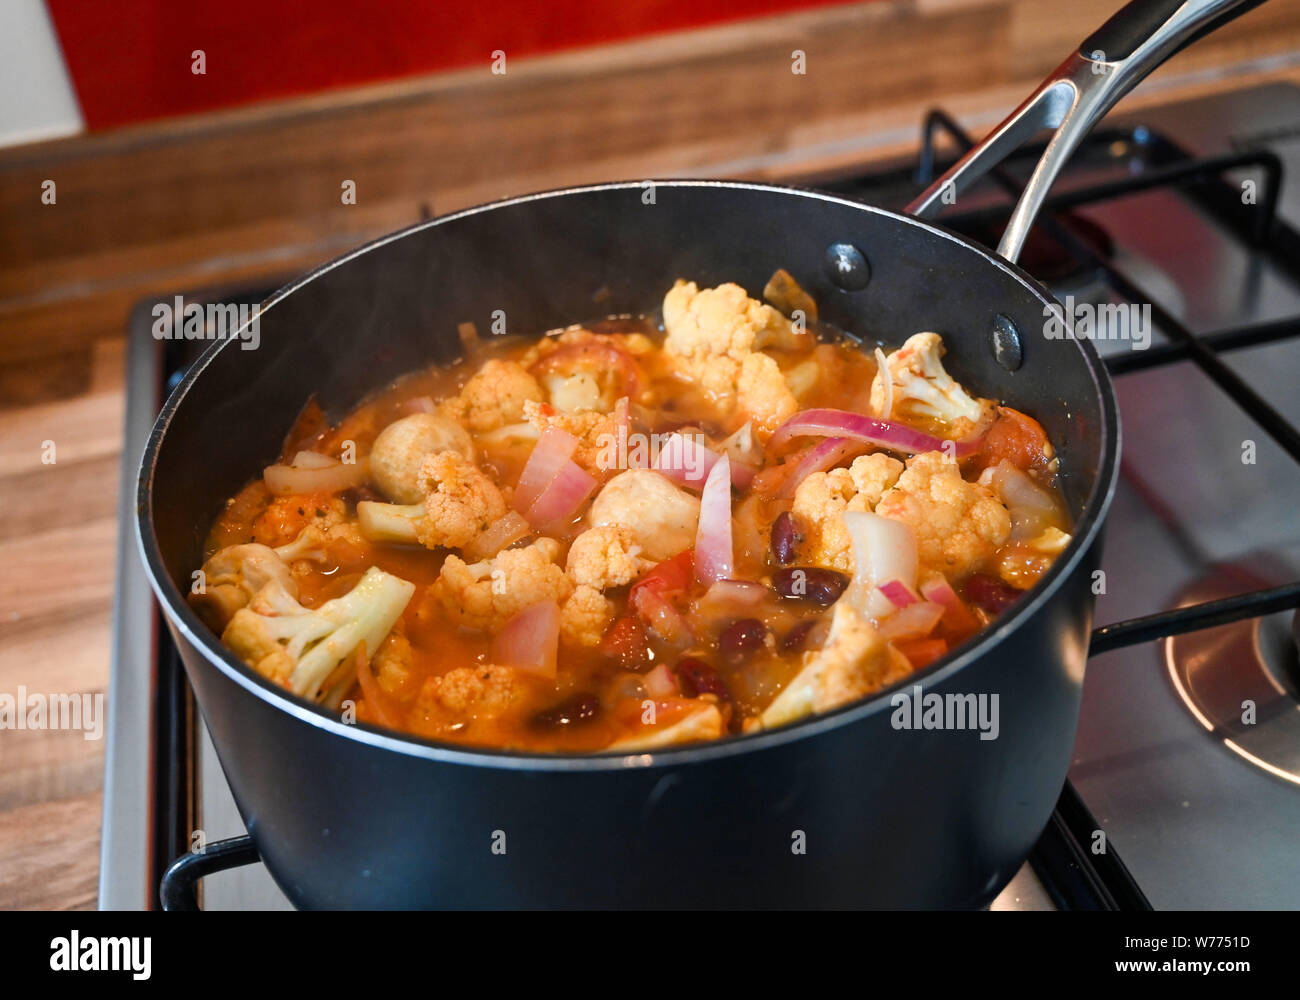 Cooking vegetables A la grecque which is a French dish . The vegetables are slightly pickled in a vegetable stock and wine Stock Photo